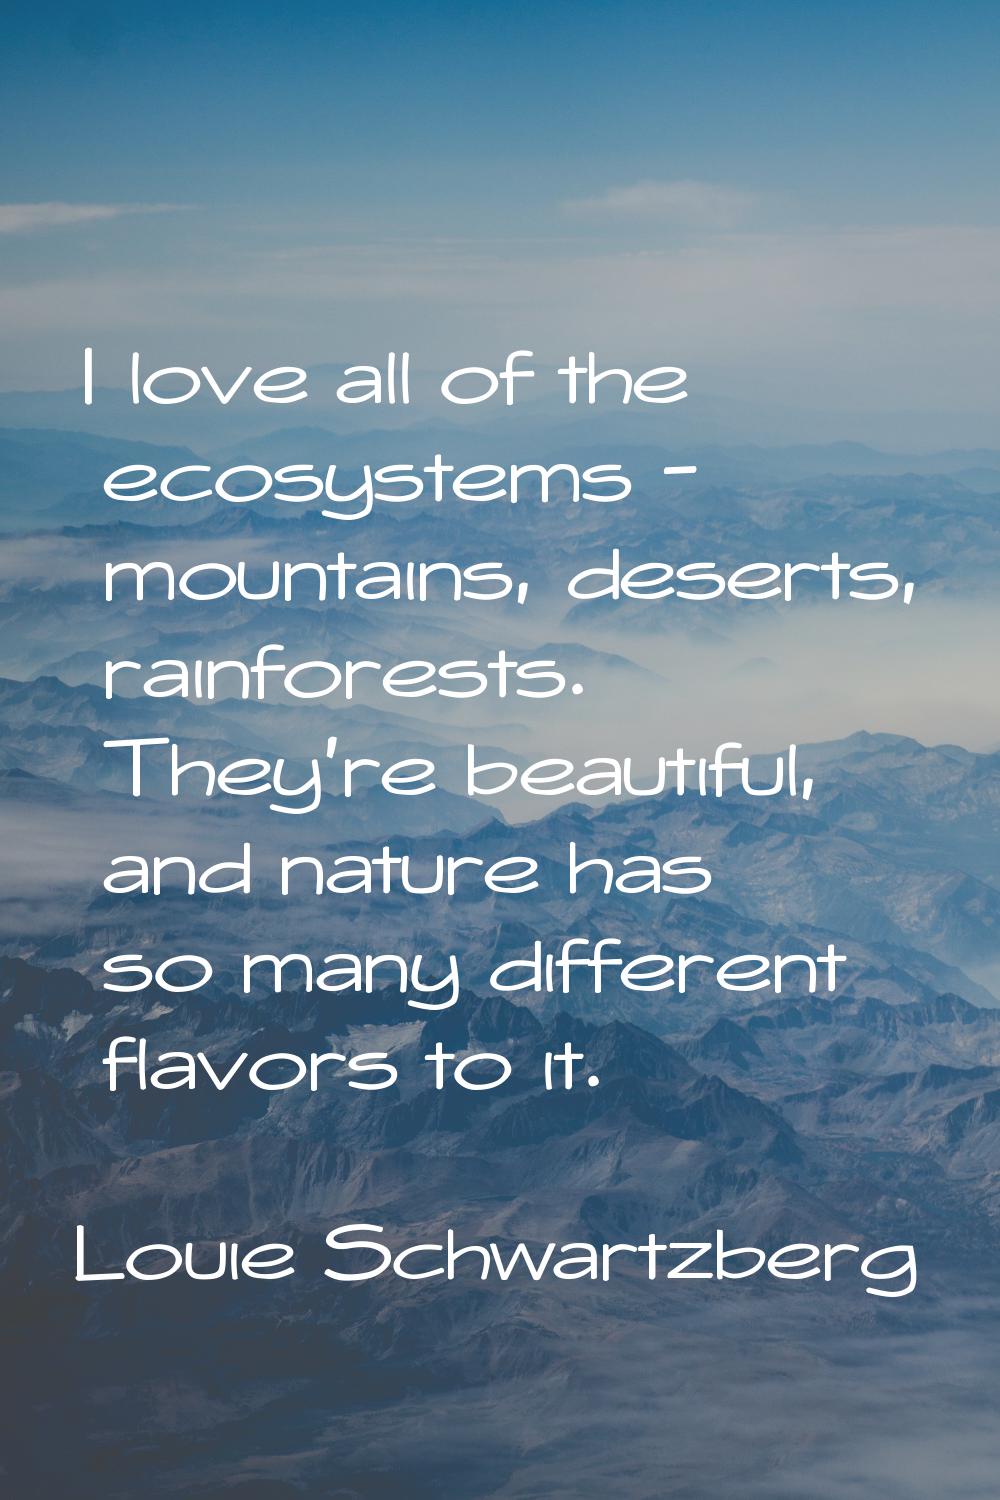 I love all of the ecosystems - mountains, deserts, rainforests. They're beautiful, and nature has s